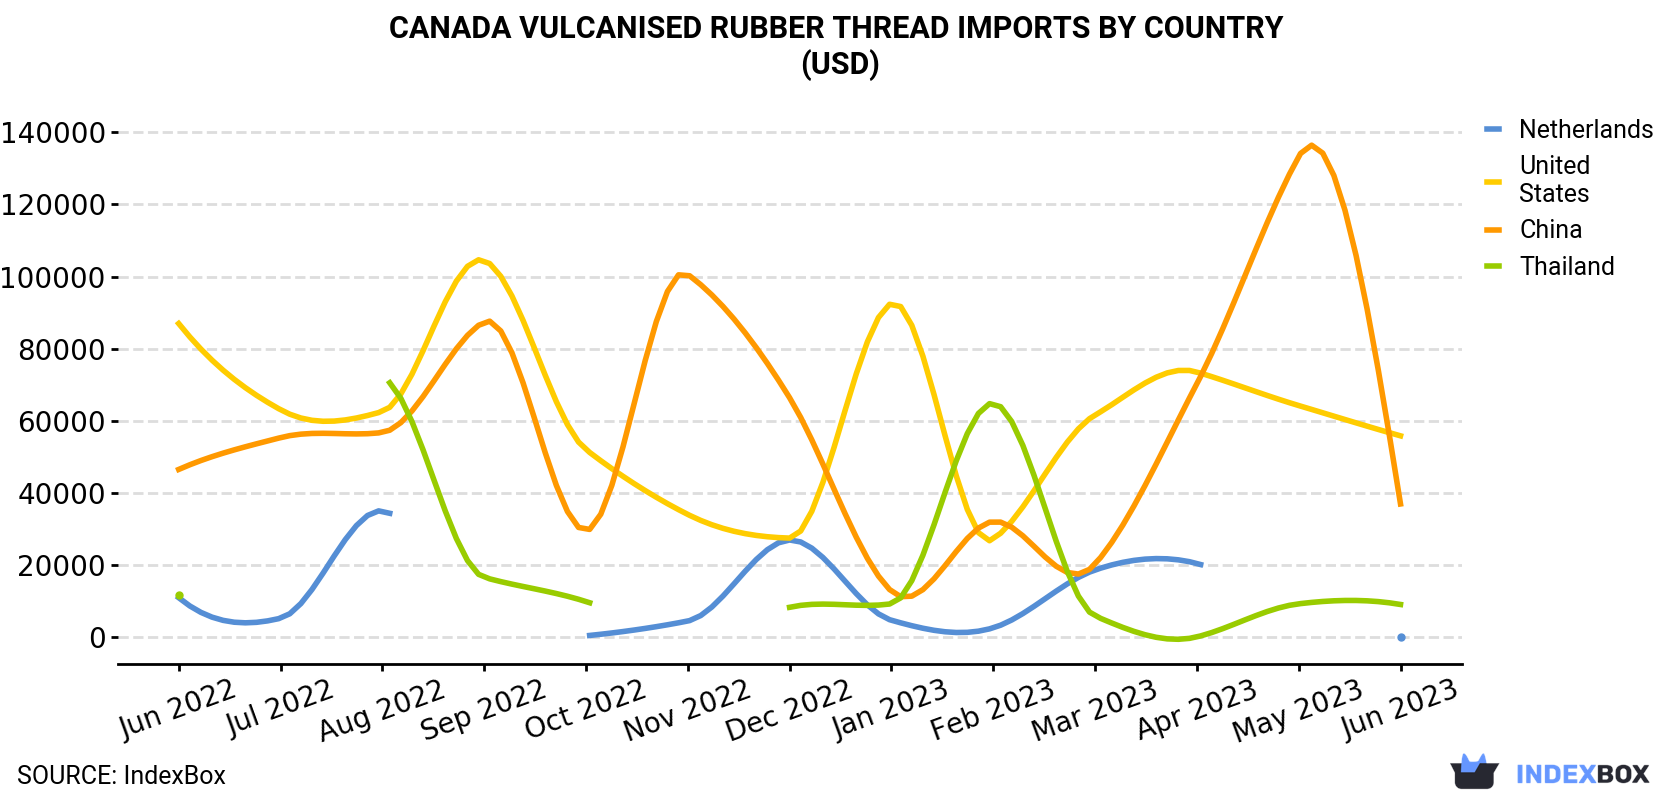 Canada Vulcanised Rubber Thread Imports By Country (USD)